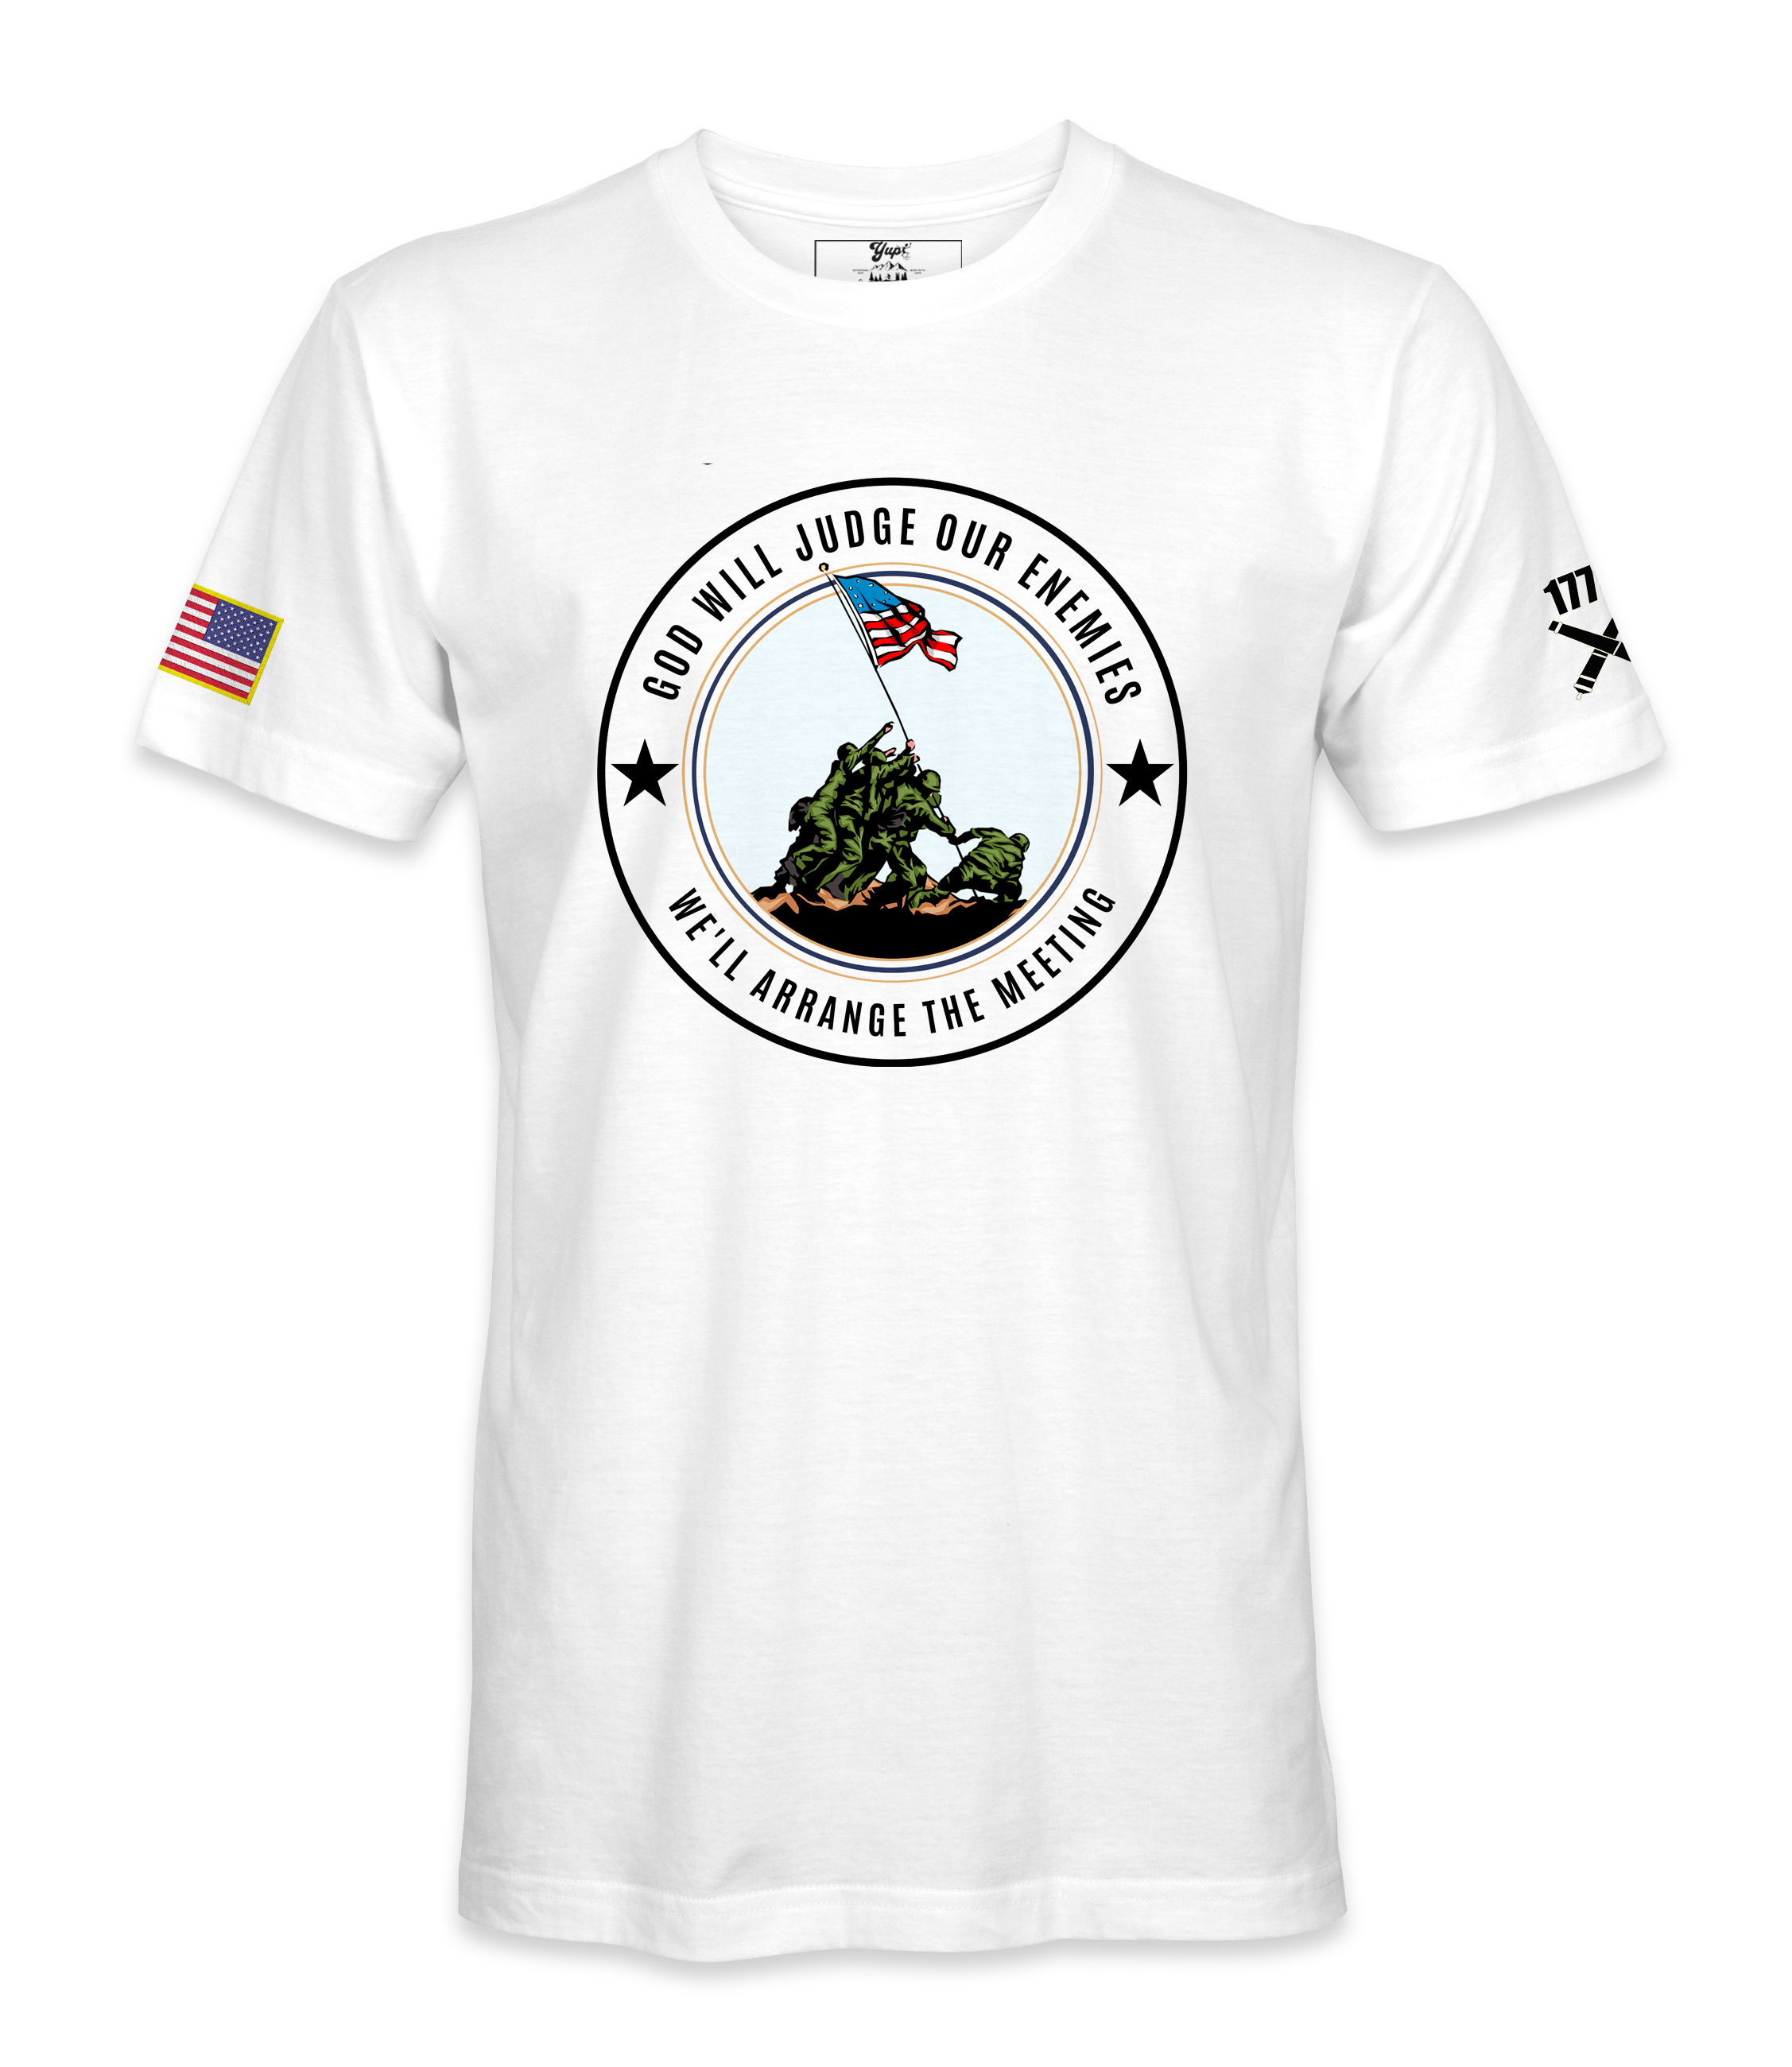 God Will Judge Our Enemies T-Shirt